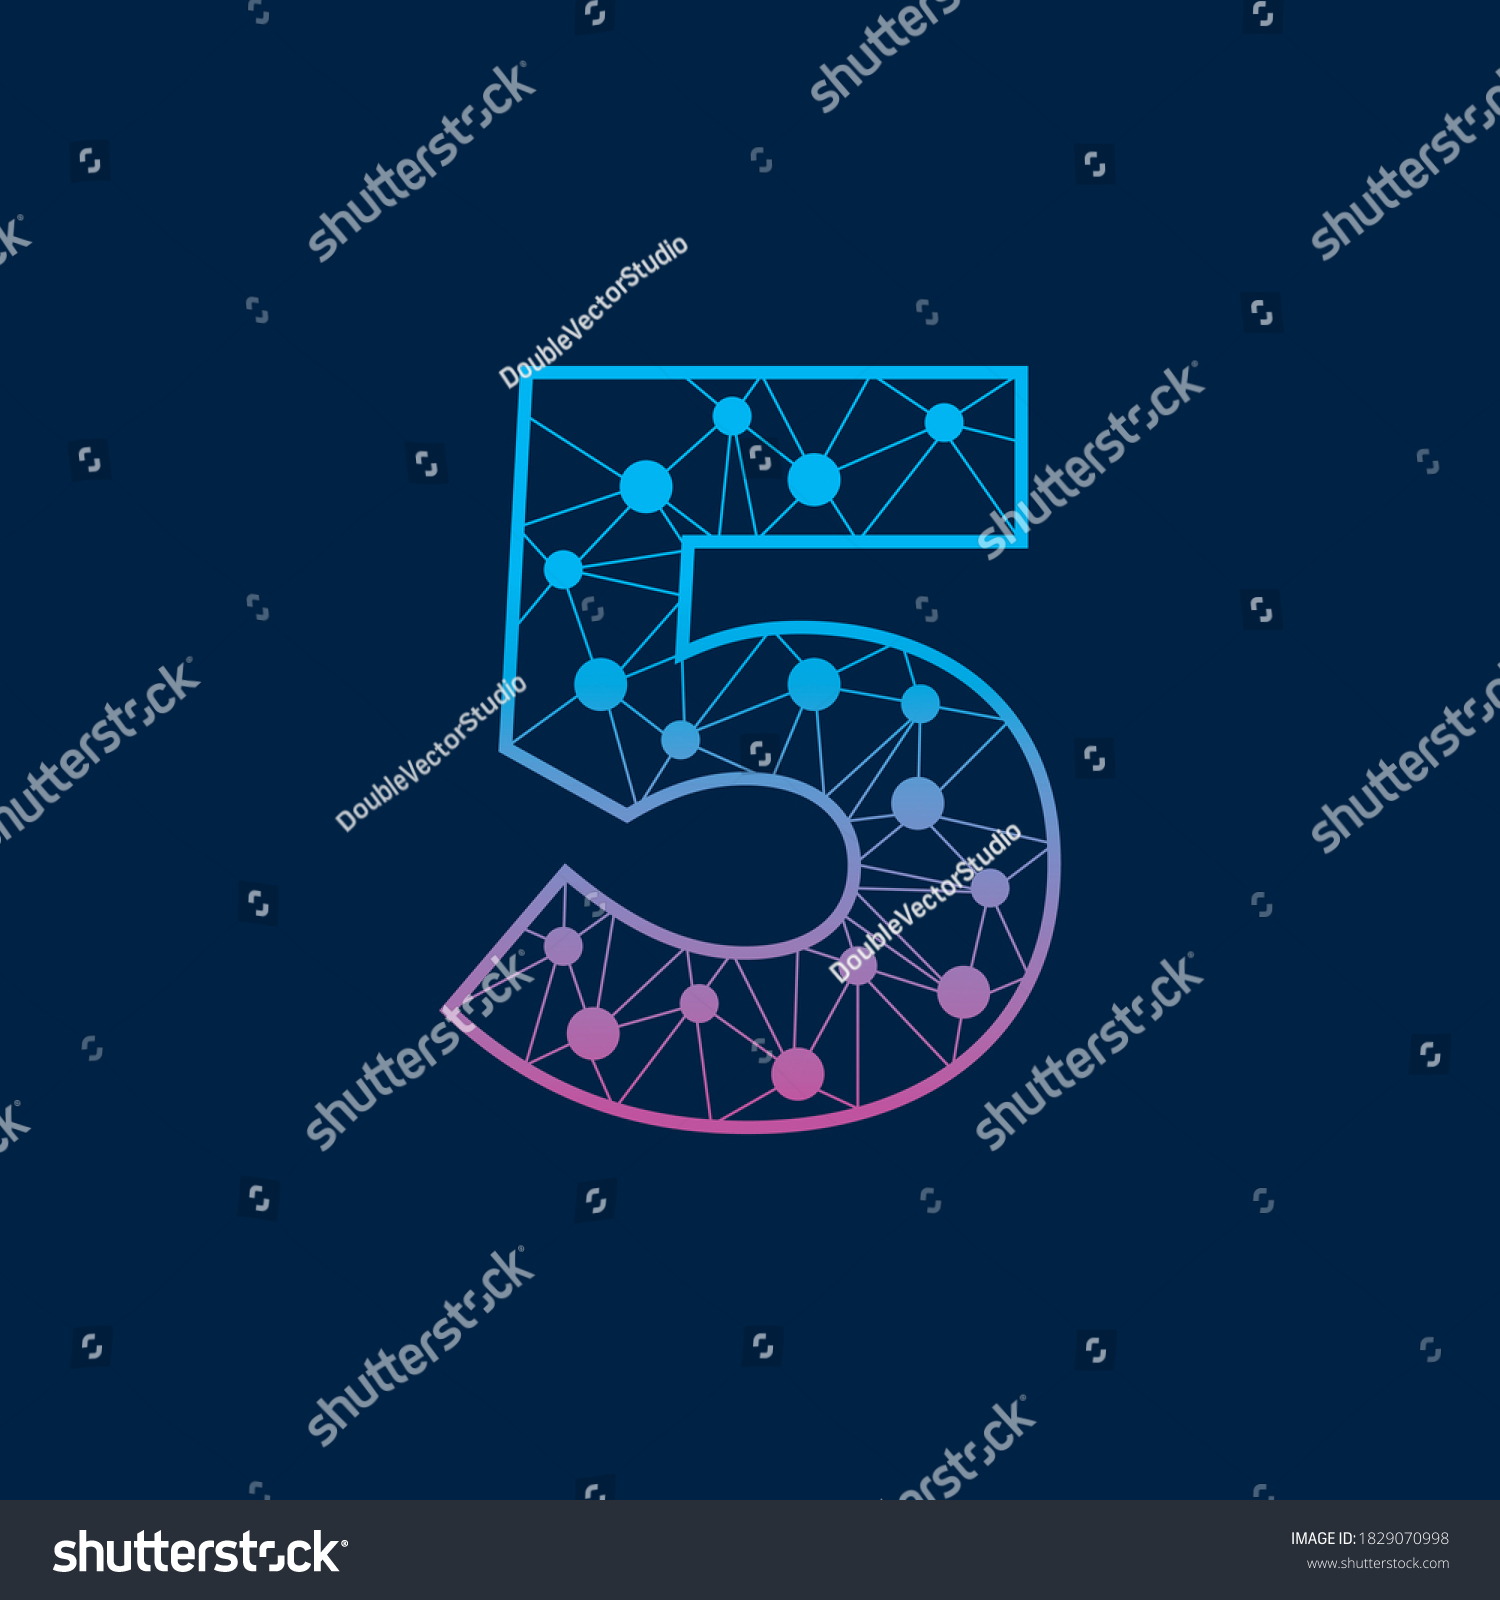 Number 5 Tech Network Logo Symbol Stock Vector (Royalty Free) 1829070998